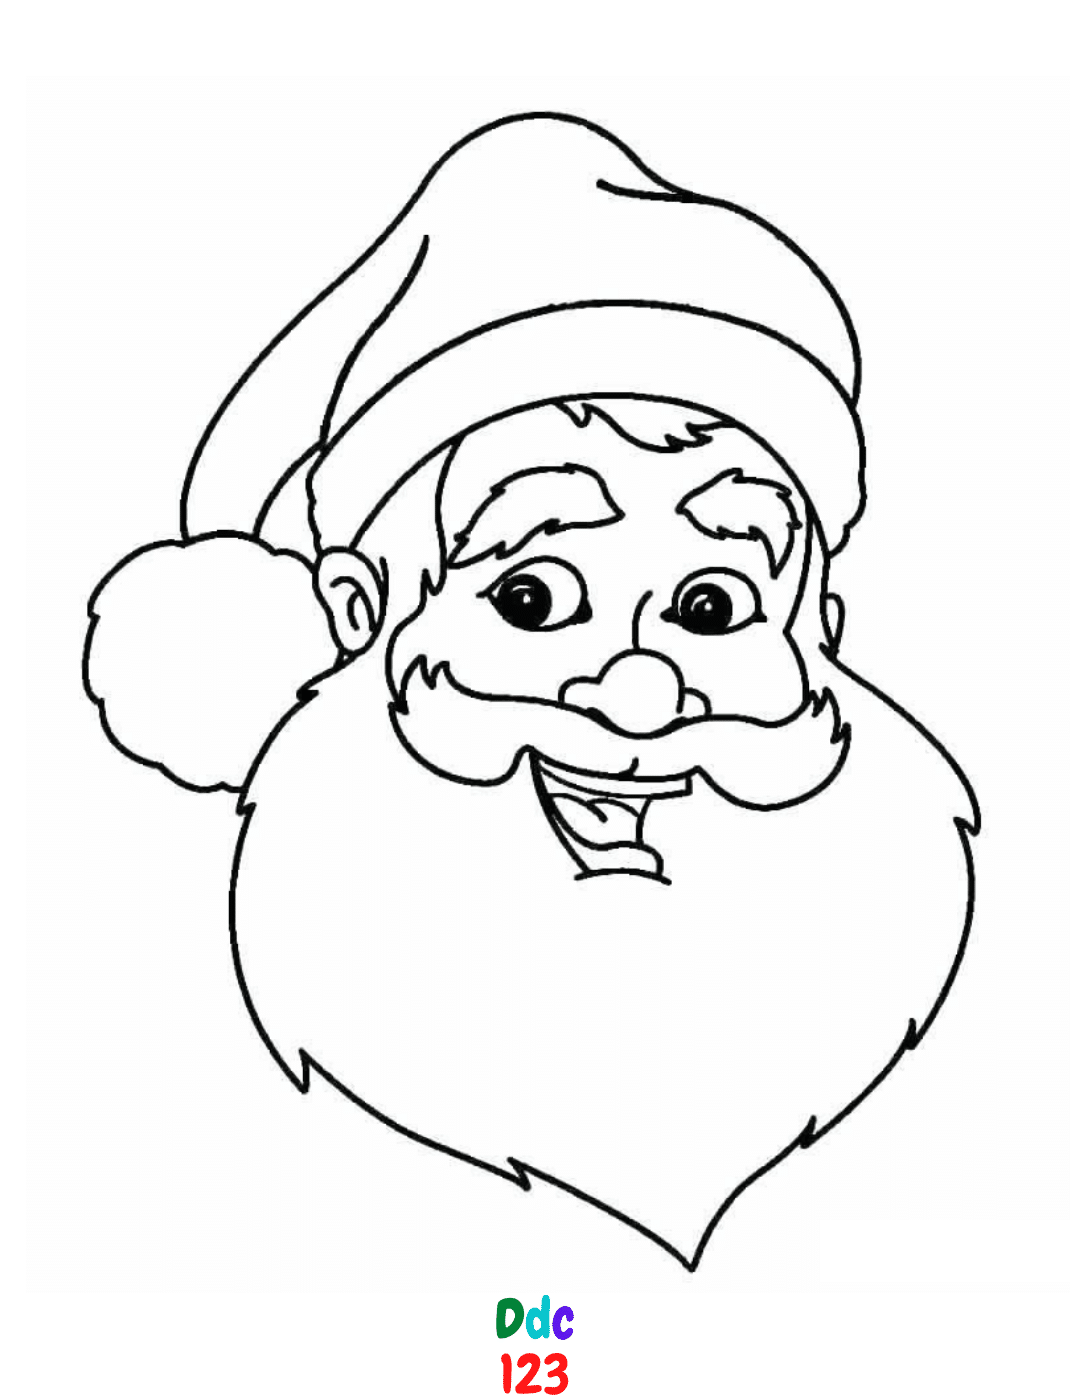 Santa Claus coloring pages for kids - DDC123